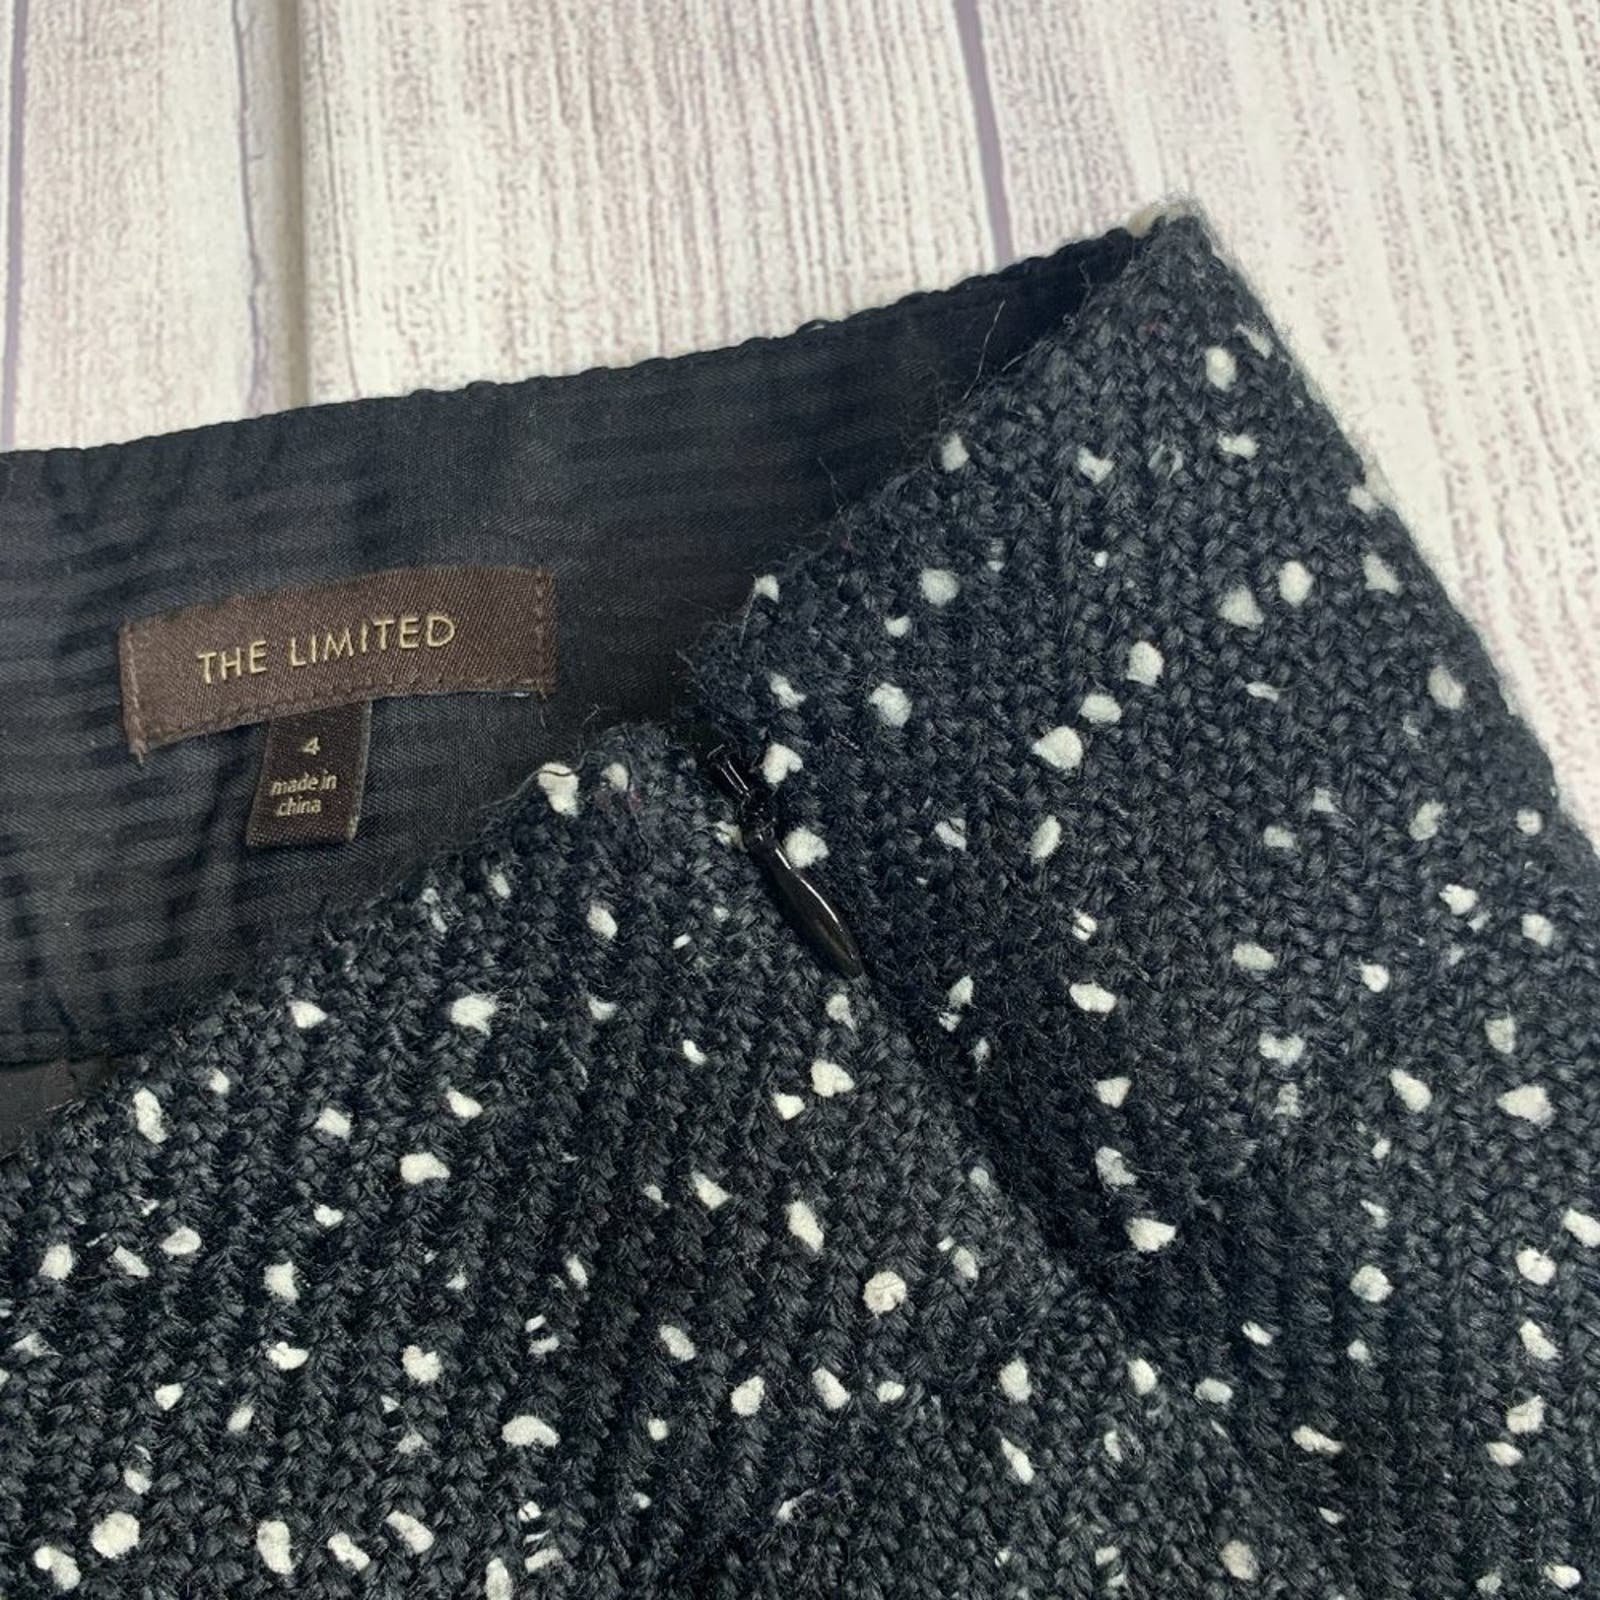 Cheap The Limited Black and White Tweed Mini Skirt Size 4 PRVJozgE3 New Style